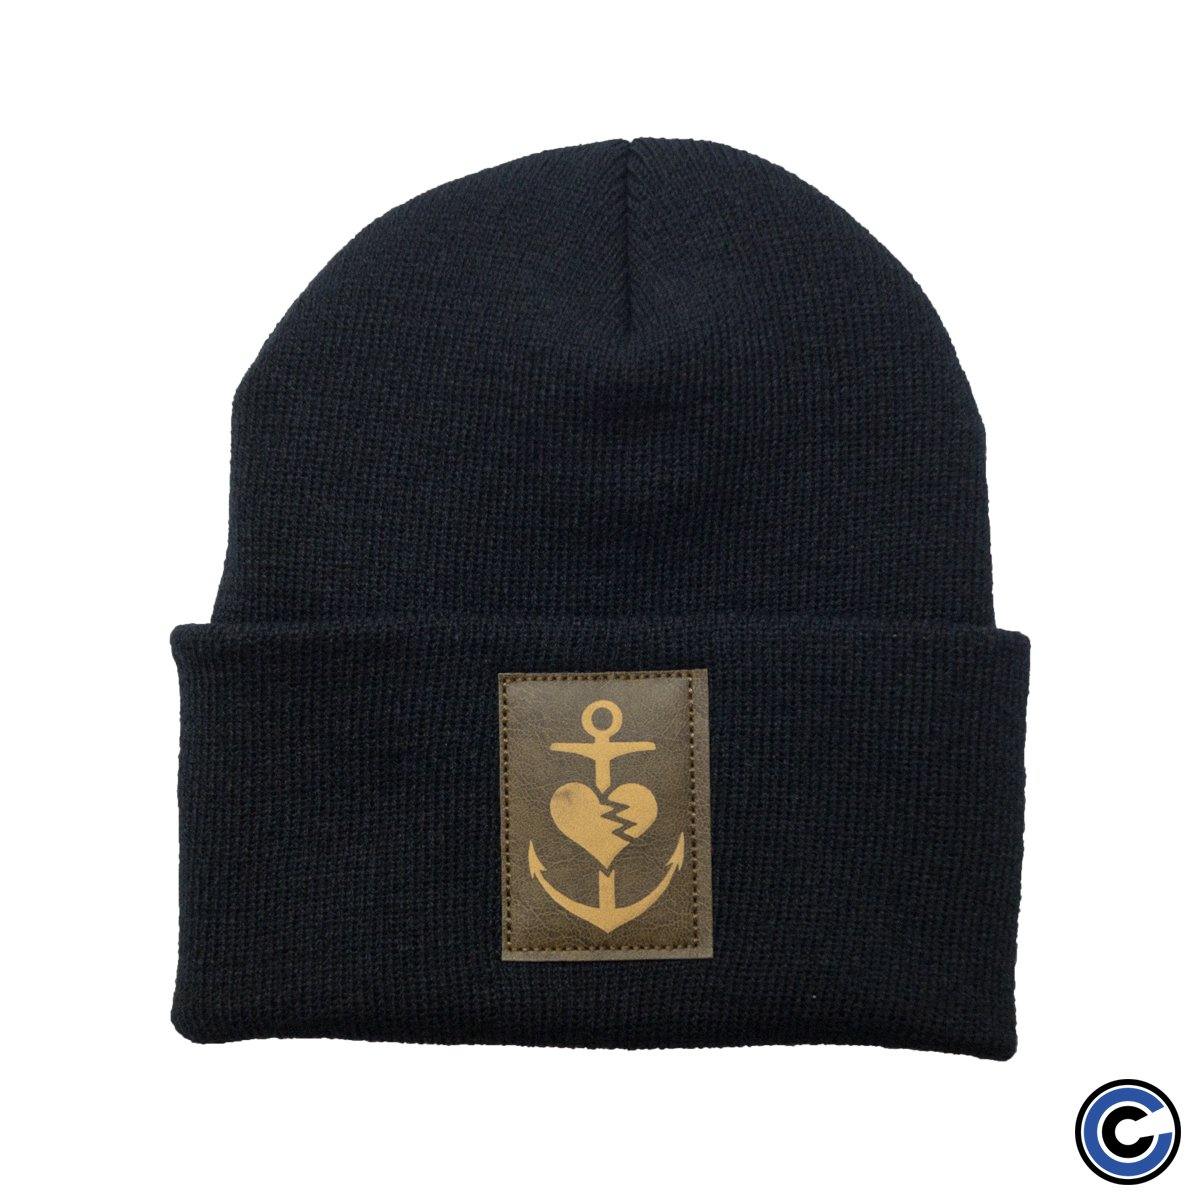 Buy – The Bouncing Souls "Anchor Heart Patch" Beanie – Band & Music Merch – Cold Cuts Merch